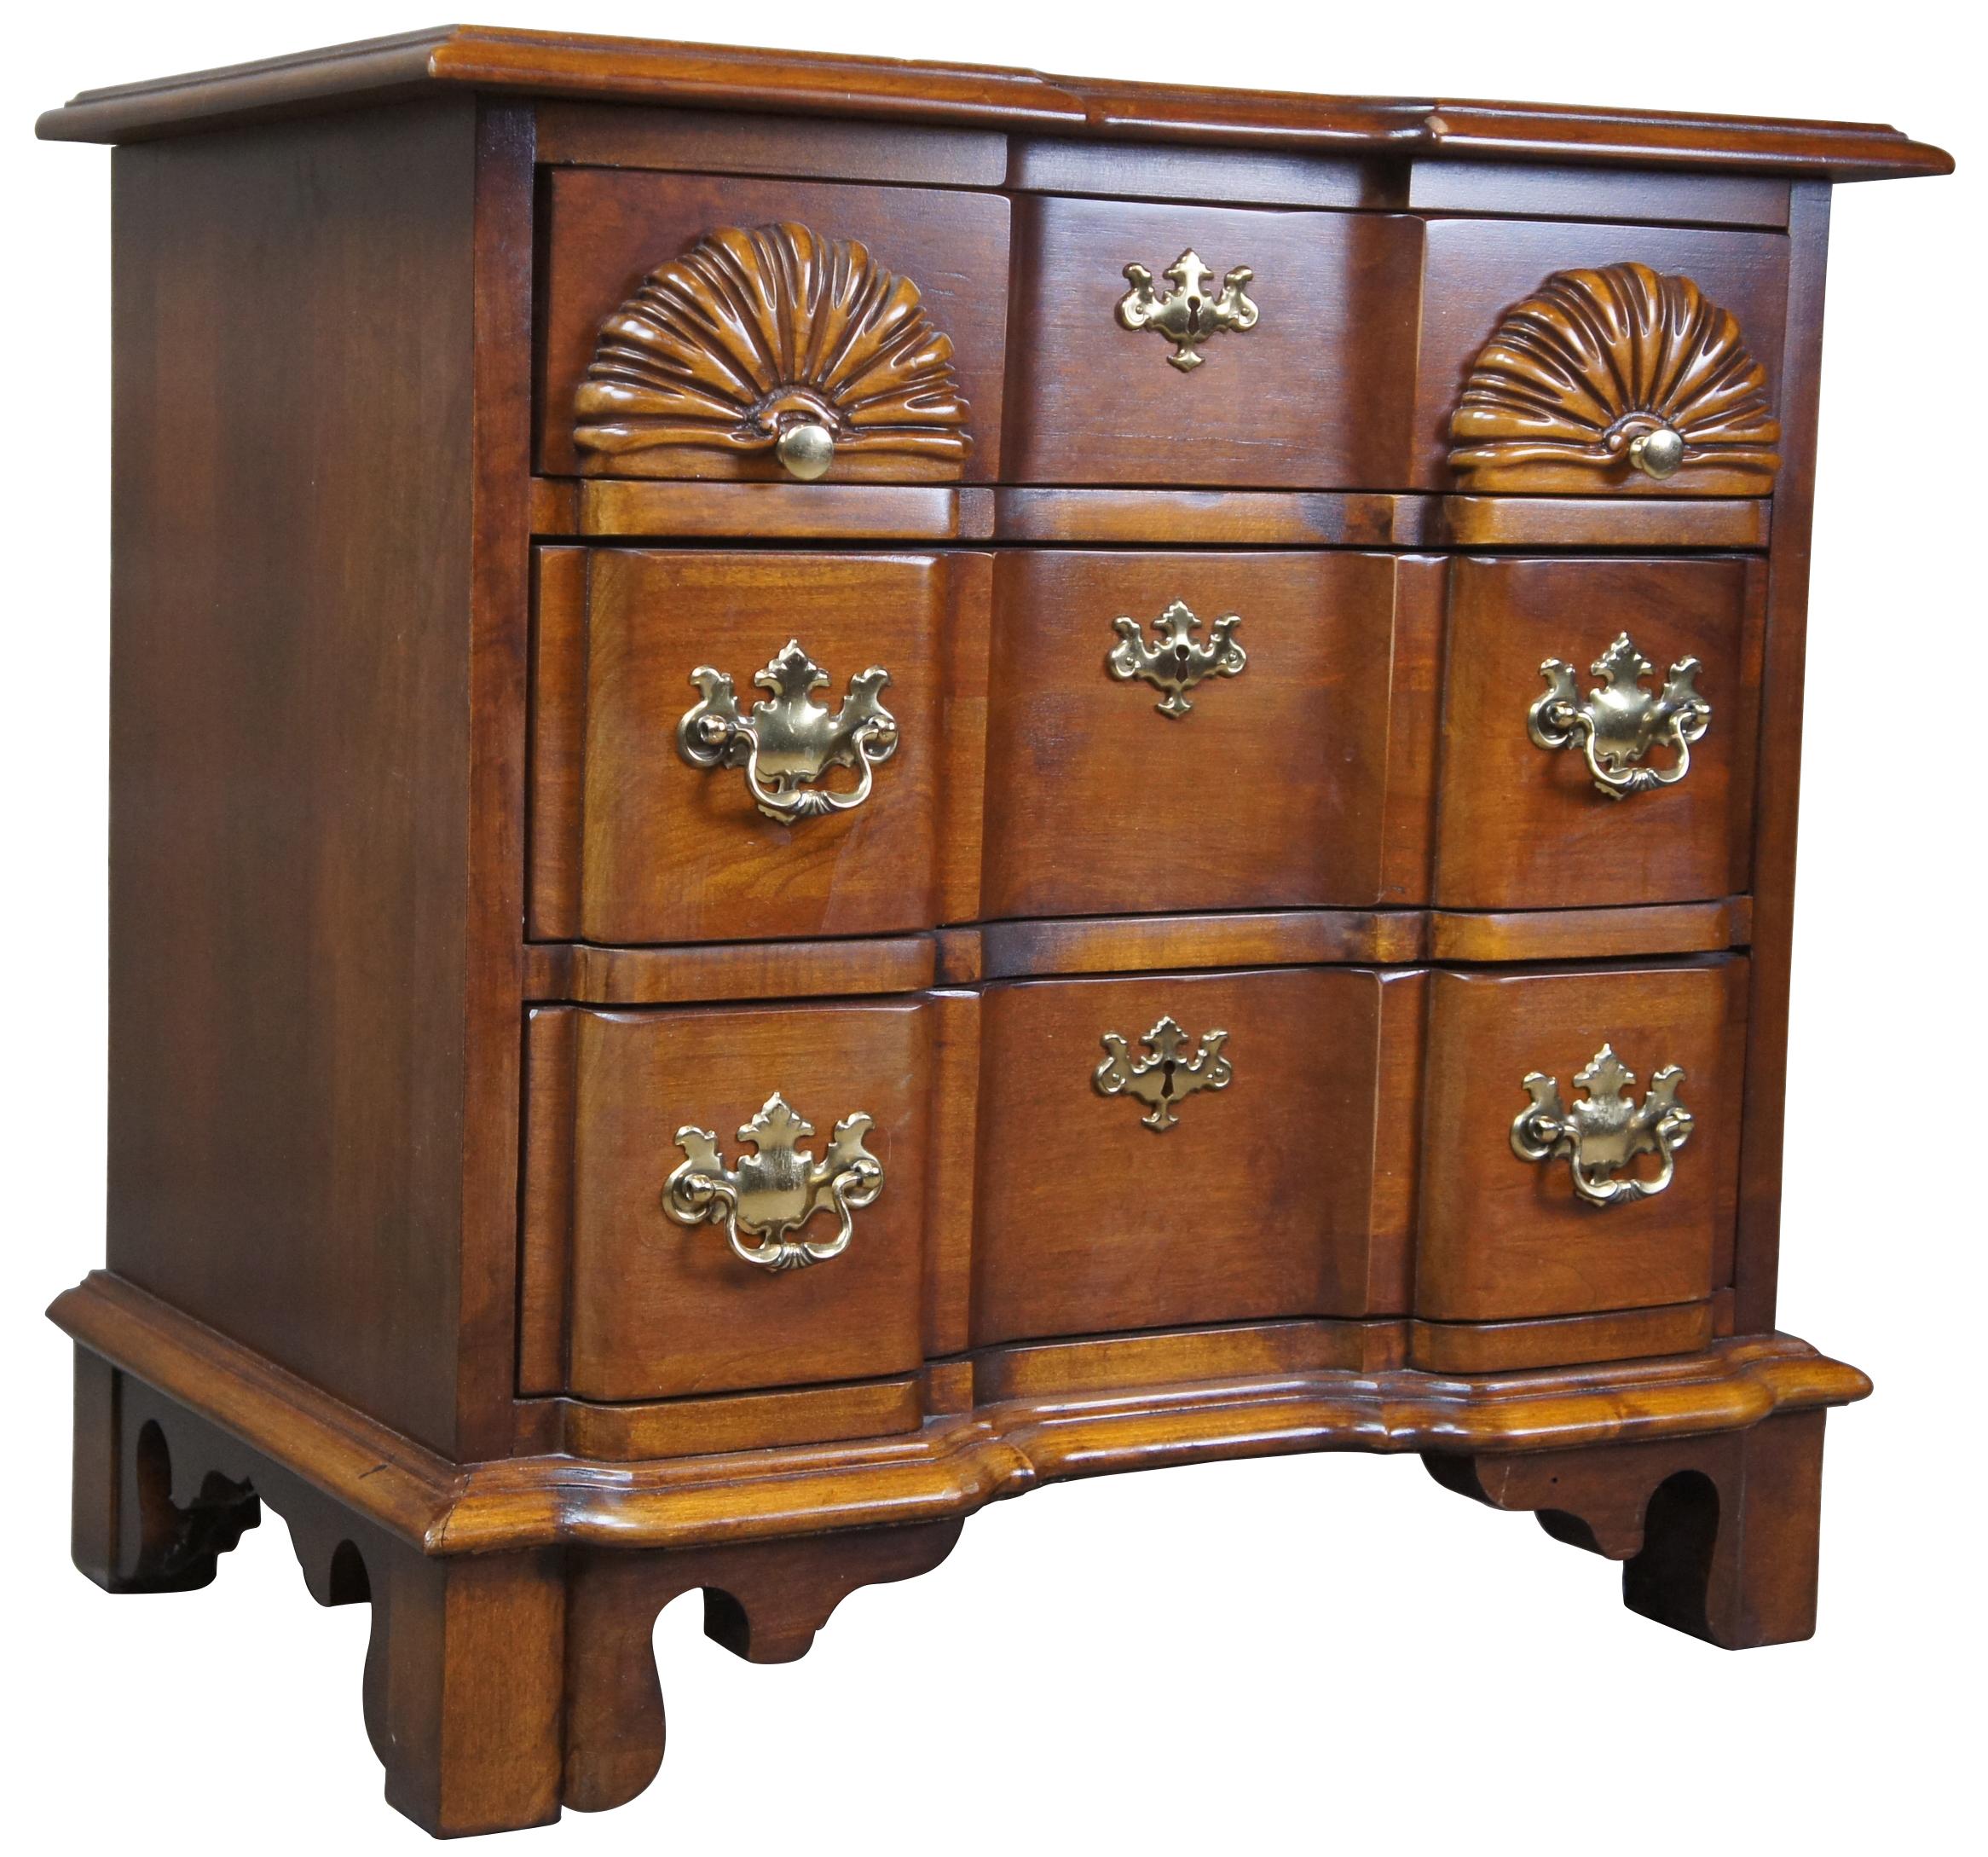 Vintage Lexington Furniture Goddard or block front chest. Made from cherry featuring Chippendale styling, carved accents and brass hardware.
 